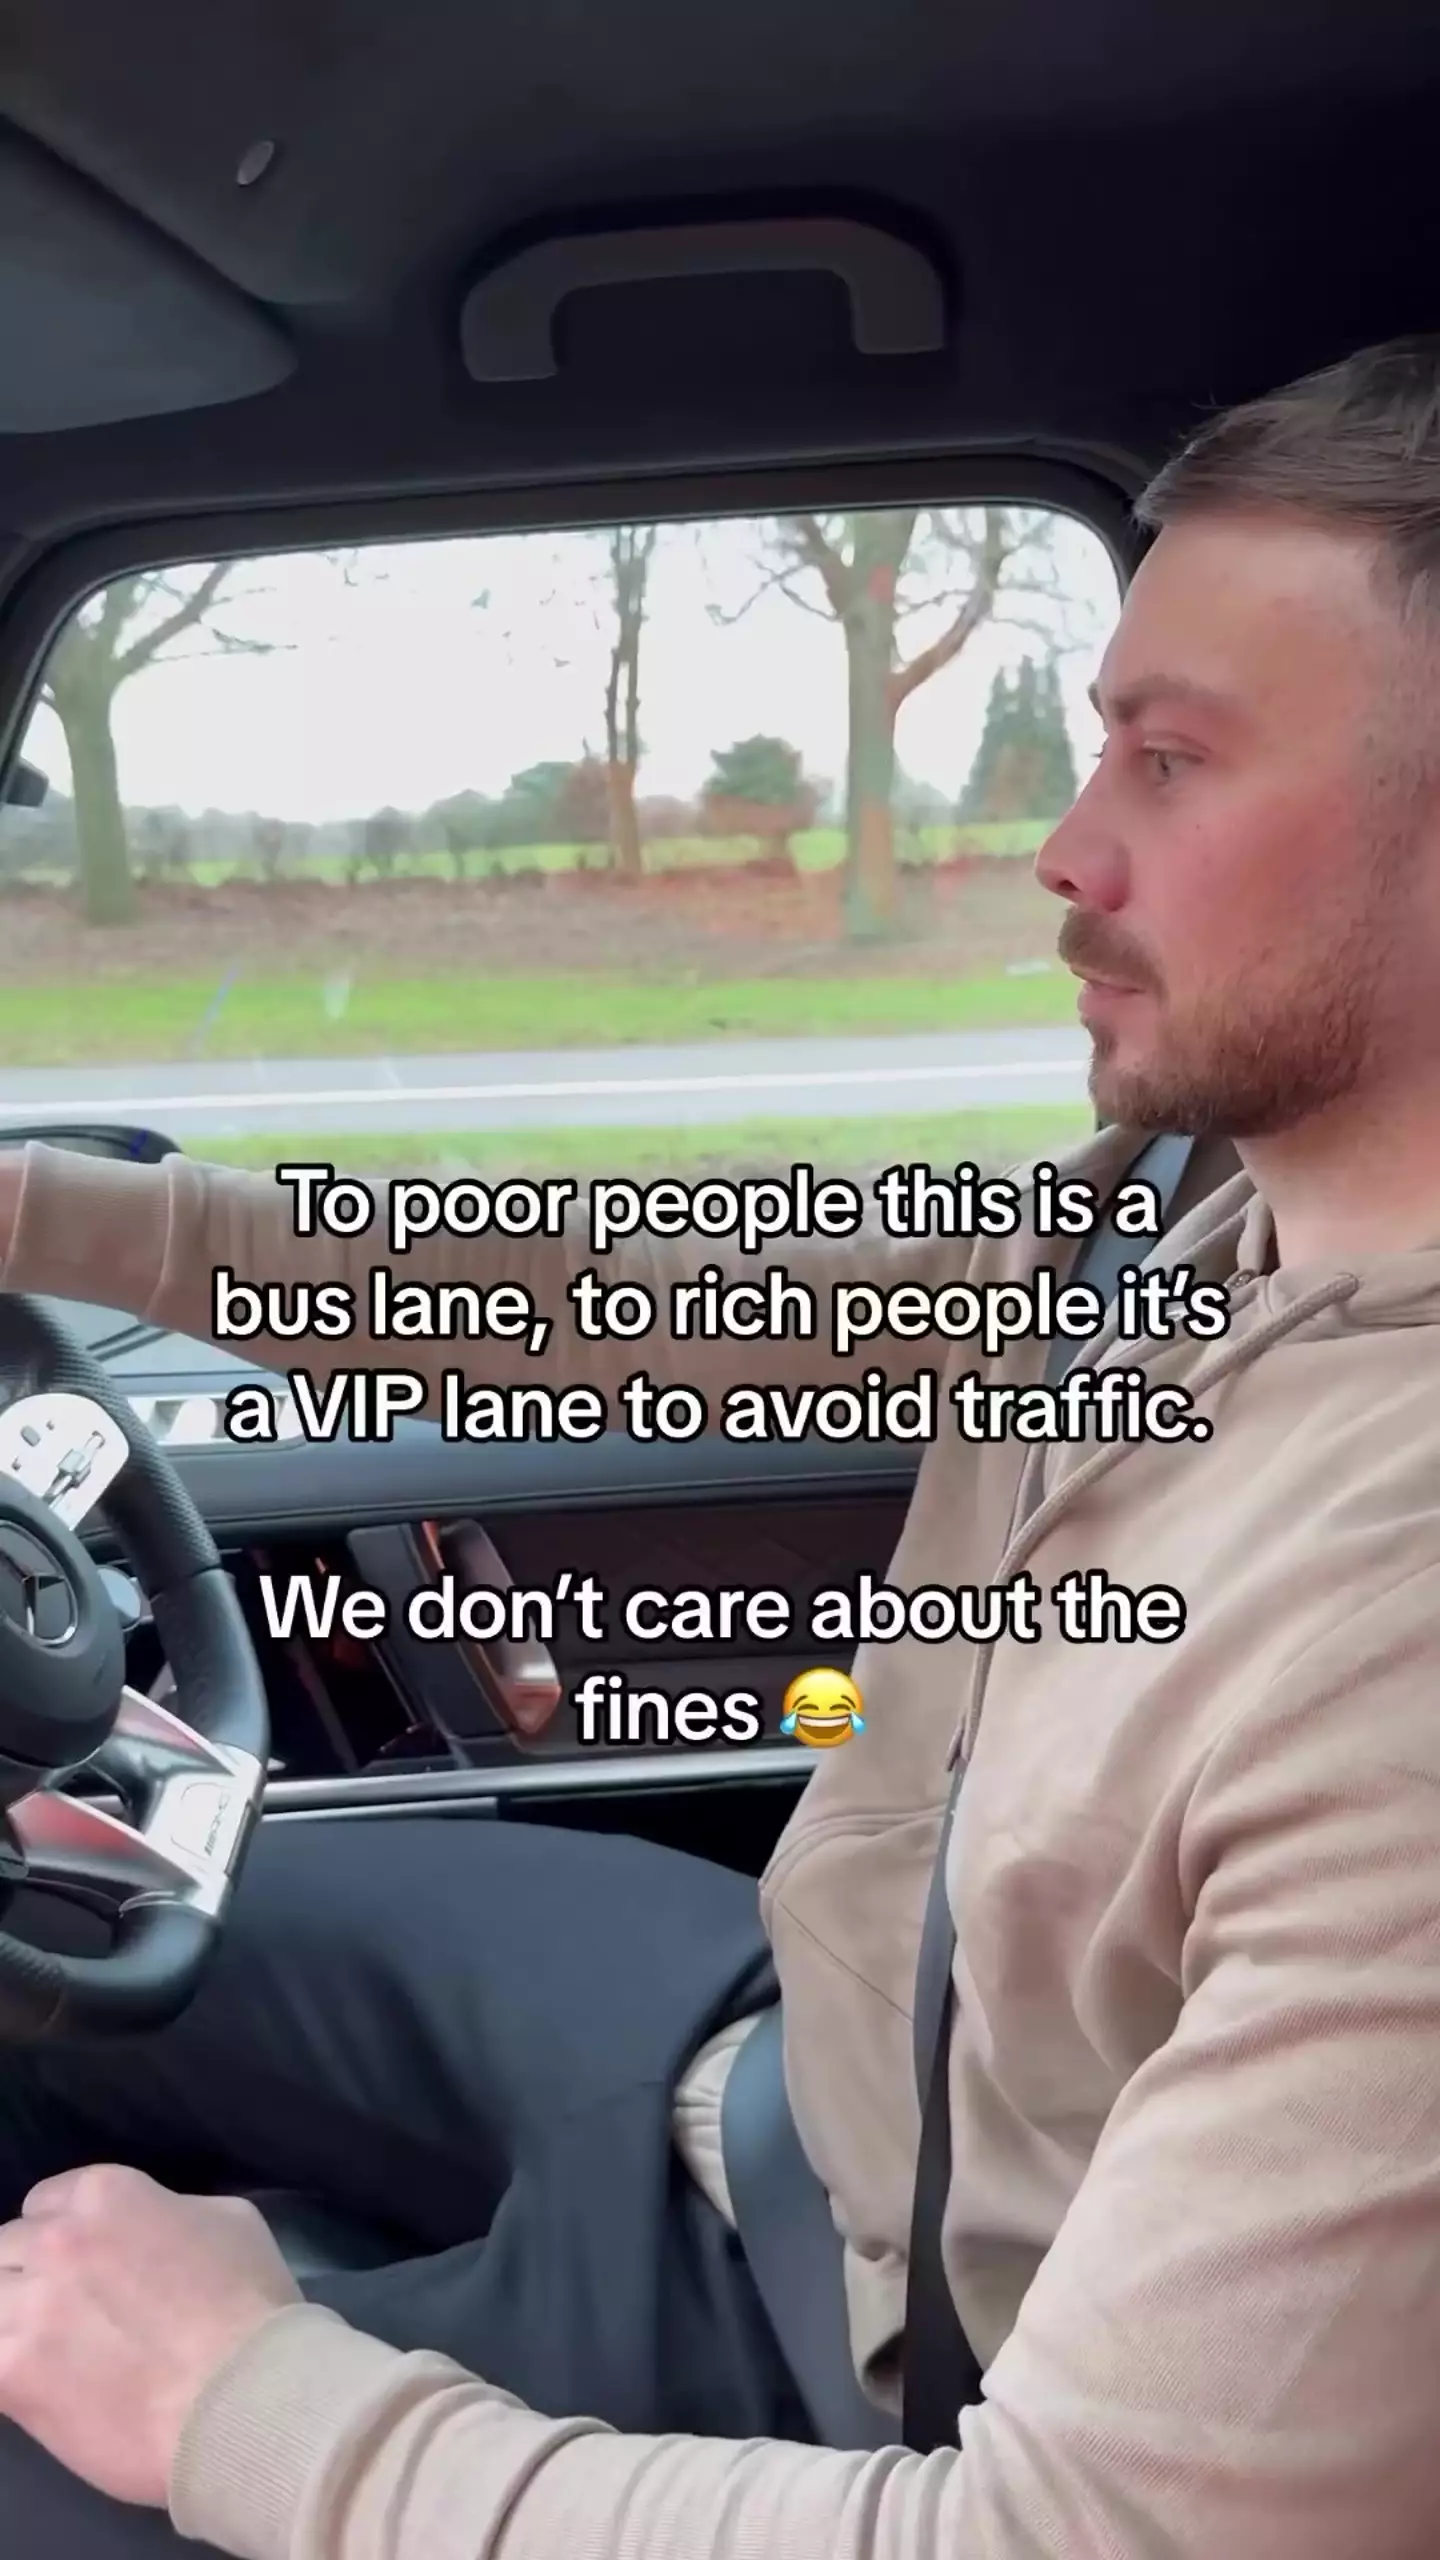 Plenty slammed him for saying rich people could use the bus lane as a 'VIP lane'.